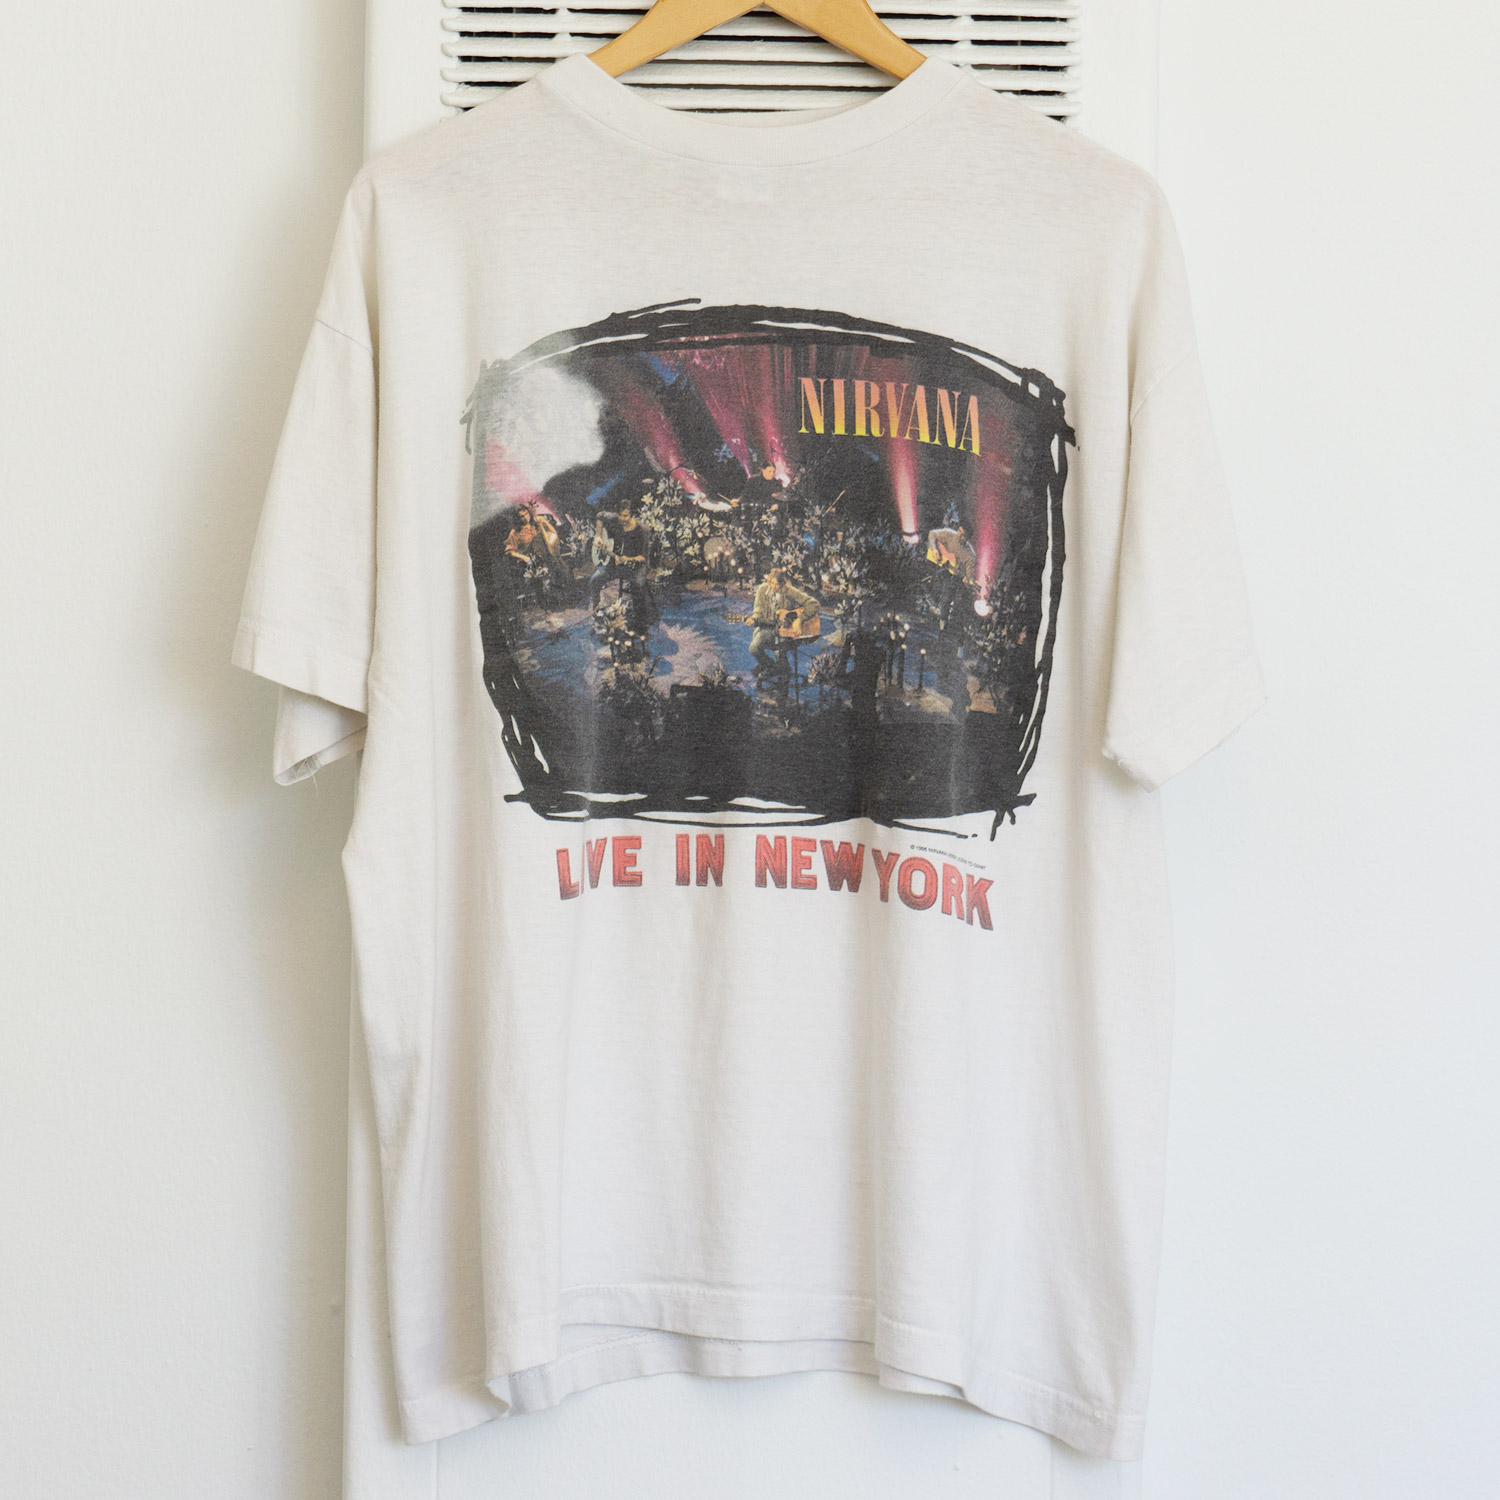 Vintage Nirvana Live in New York T-shirt, Front